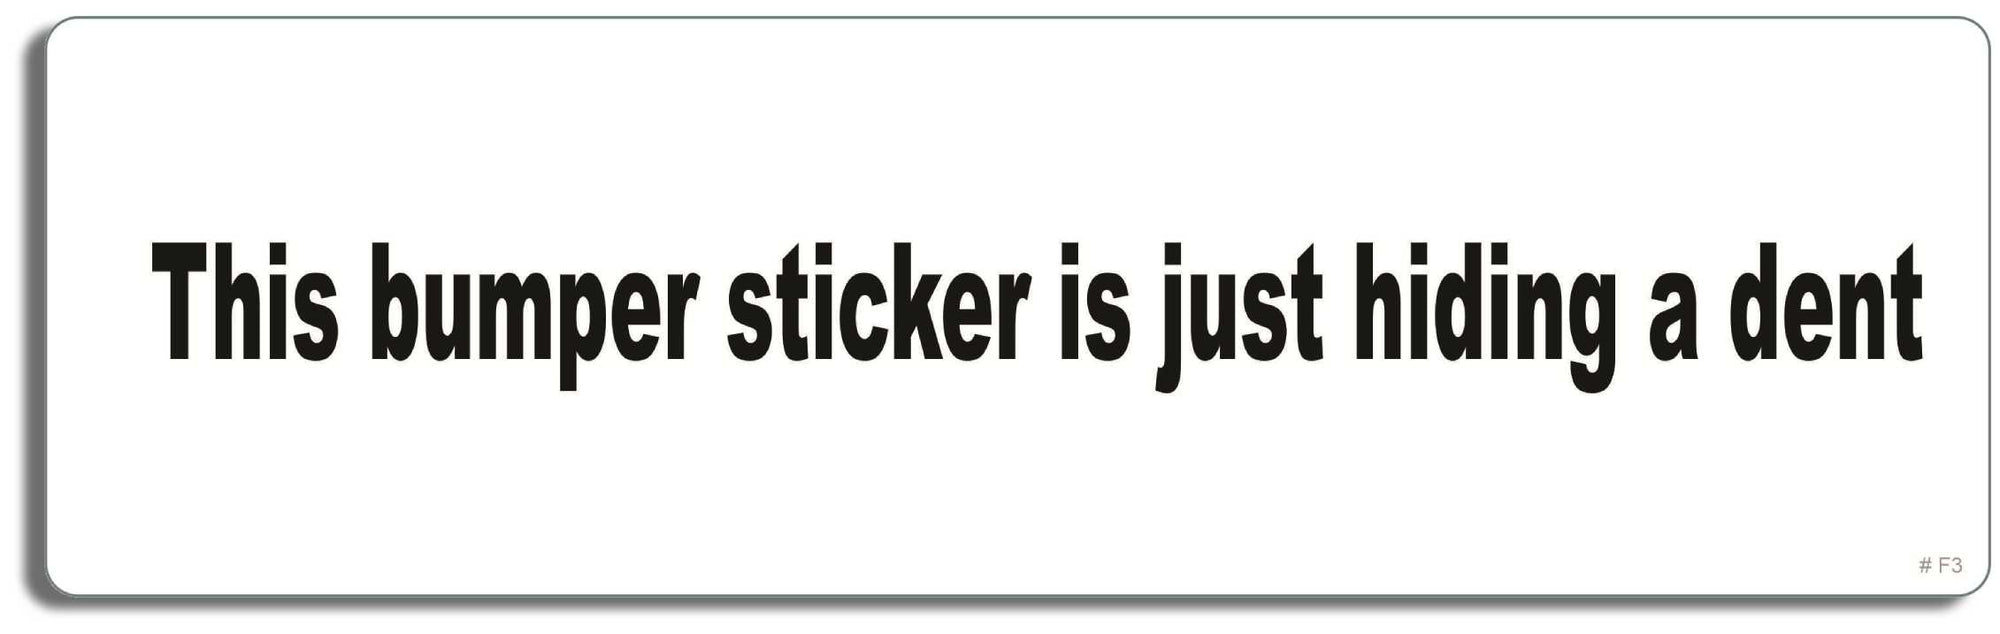 This bumper Sticker- is just hiding a dent - 3" x 10" Bumper Sticker--Car Magnet- -  Decal Bumper Sticker-funny Bumper Sticker Car Magnet This  sticker is just hiding-  Decal for cars funny, funny quote, funny saying